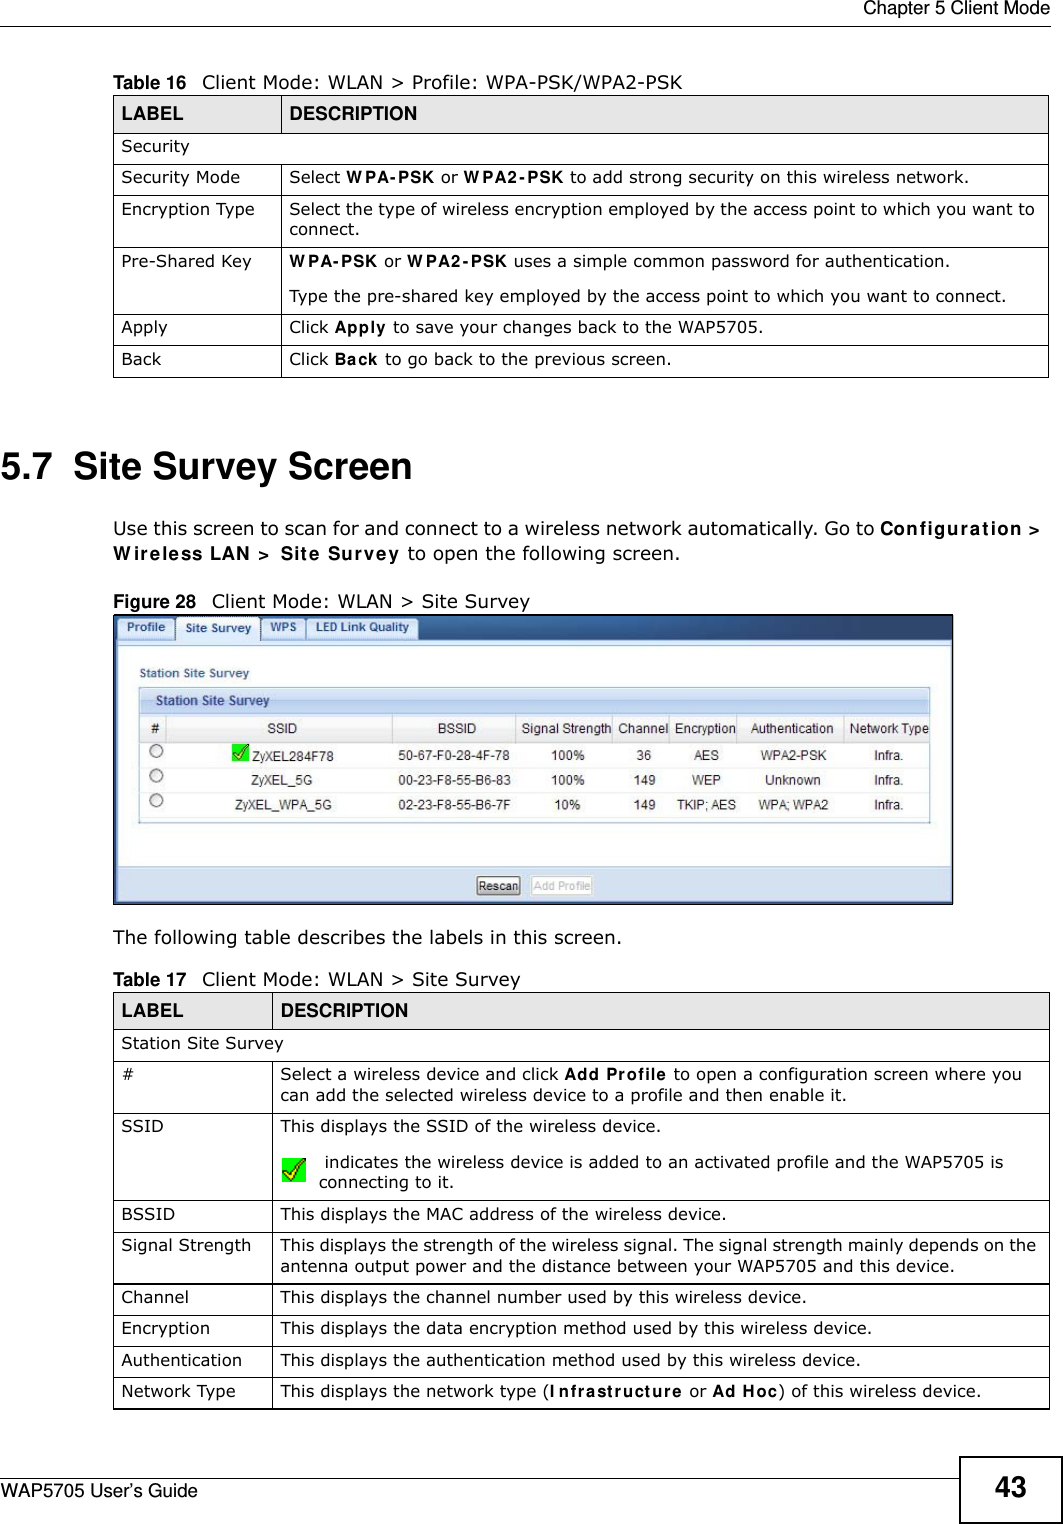  Chapter 5 Client ModeWAP5705 User’s Guide 435.7  Site Survey ScreenUse this screen to scan for and connect to a wireless network automatically. Go to Configuration &gt;  W ire le ss LAN &gt;  Sit e Su rve y to open the following screen.Figure 28   Client Mode: WLAN &gt; Site Survey The following table describes the labels in this screen. SecuritySecurity Mode Select W PA- PSK or W PA2 - PSK to add strong security on this wireless network.Encryption Type Select the type of wireless encryption employed by the access point to which you want to connect. Pre-Shared Key  W PA- PSK or W PA2 - PSK uses a simple common password for authentication.Type the pre-shared key employed by the access point to which you want to connect. Apply Click Apply to save your changes back to the WAP5705.Back Click Ba ck to go back to the previous screen.Table 16   Client Mode: WLAN &gt; Profile: WPA-PSK/WPA2-PSKLABEL DESCRIPTIONTable 17   Client Mode: WLAN &gt; Site SurveyLABEL  DESCRIPTIONStation Site Survey# Select a wireless device and click Add Pr ofile  to open a configuration screen where you can add the selected wireless device to a profile and then enable it.SSID This displays the SSID of the wireless device. indicates the wireless device is added to an activated profile and the WAP5705 is connecting to it.BSSID This displays the MAC address of the wireless device.Signal Strength This displays the strength of the wireless signal. The signal strength mainly depends on the antenna output power and the distance between your WAP5705 and this device.Channel This displays the channel number used by this wireless device. Encryption This displays the data encryption method used by this wireless device.Authentication This displays the authentication method used by this wireless device.Network Type This displays the network type (I n fr a st r uct u re  or Ad H oc) of this wireless device.